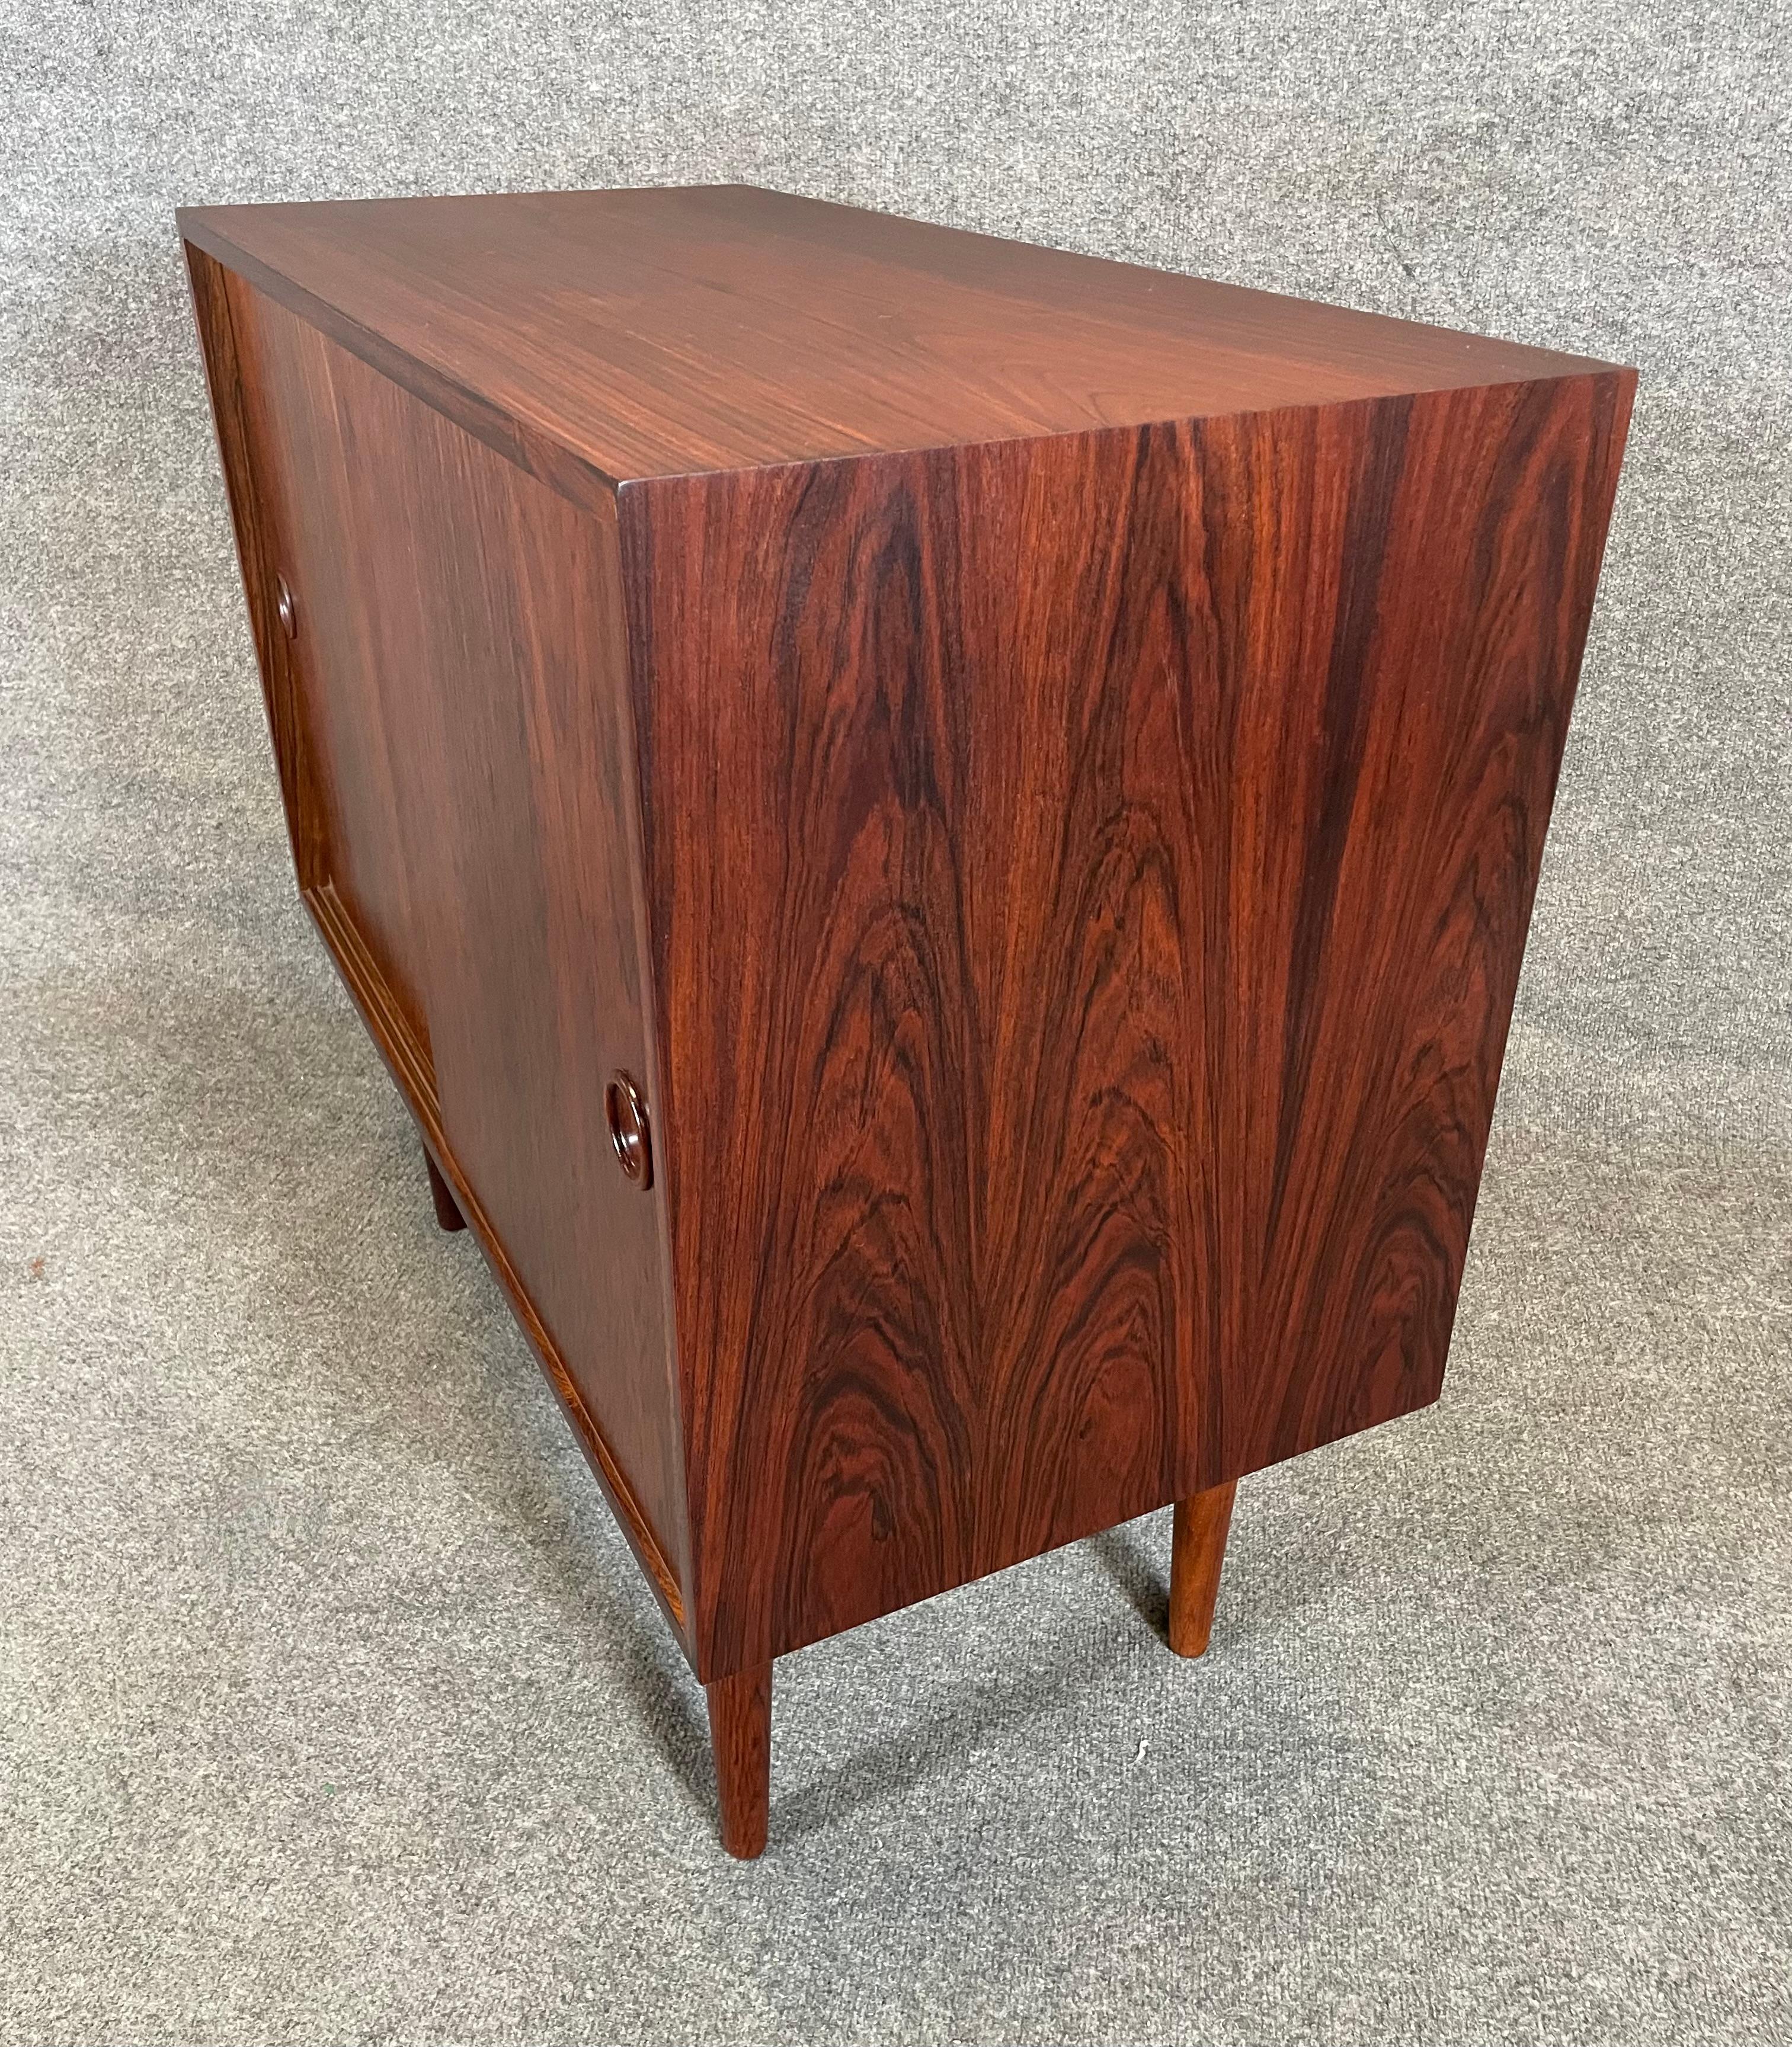 Here is a beautiful Scandinavian modern cupboard cabinet in rosewood designed by Kai Kristiansen and manufactured by Feldballes Mobelfabrik in Denmark in the 1960s. This lovely case piece, recently imported from Europe to California before its